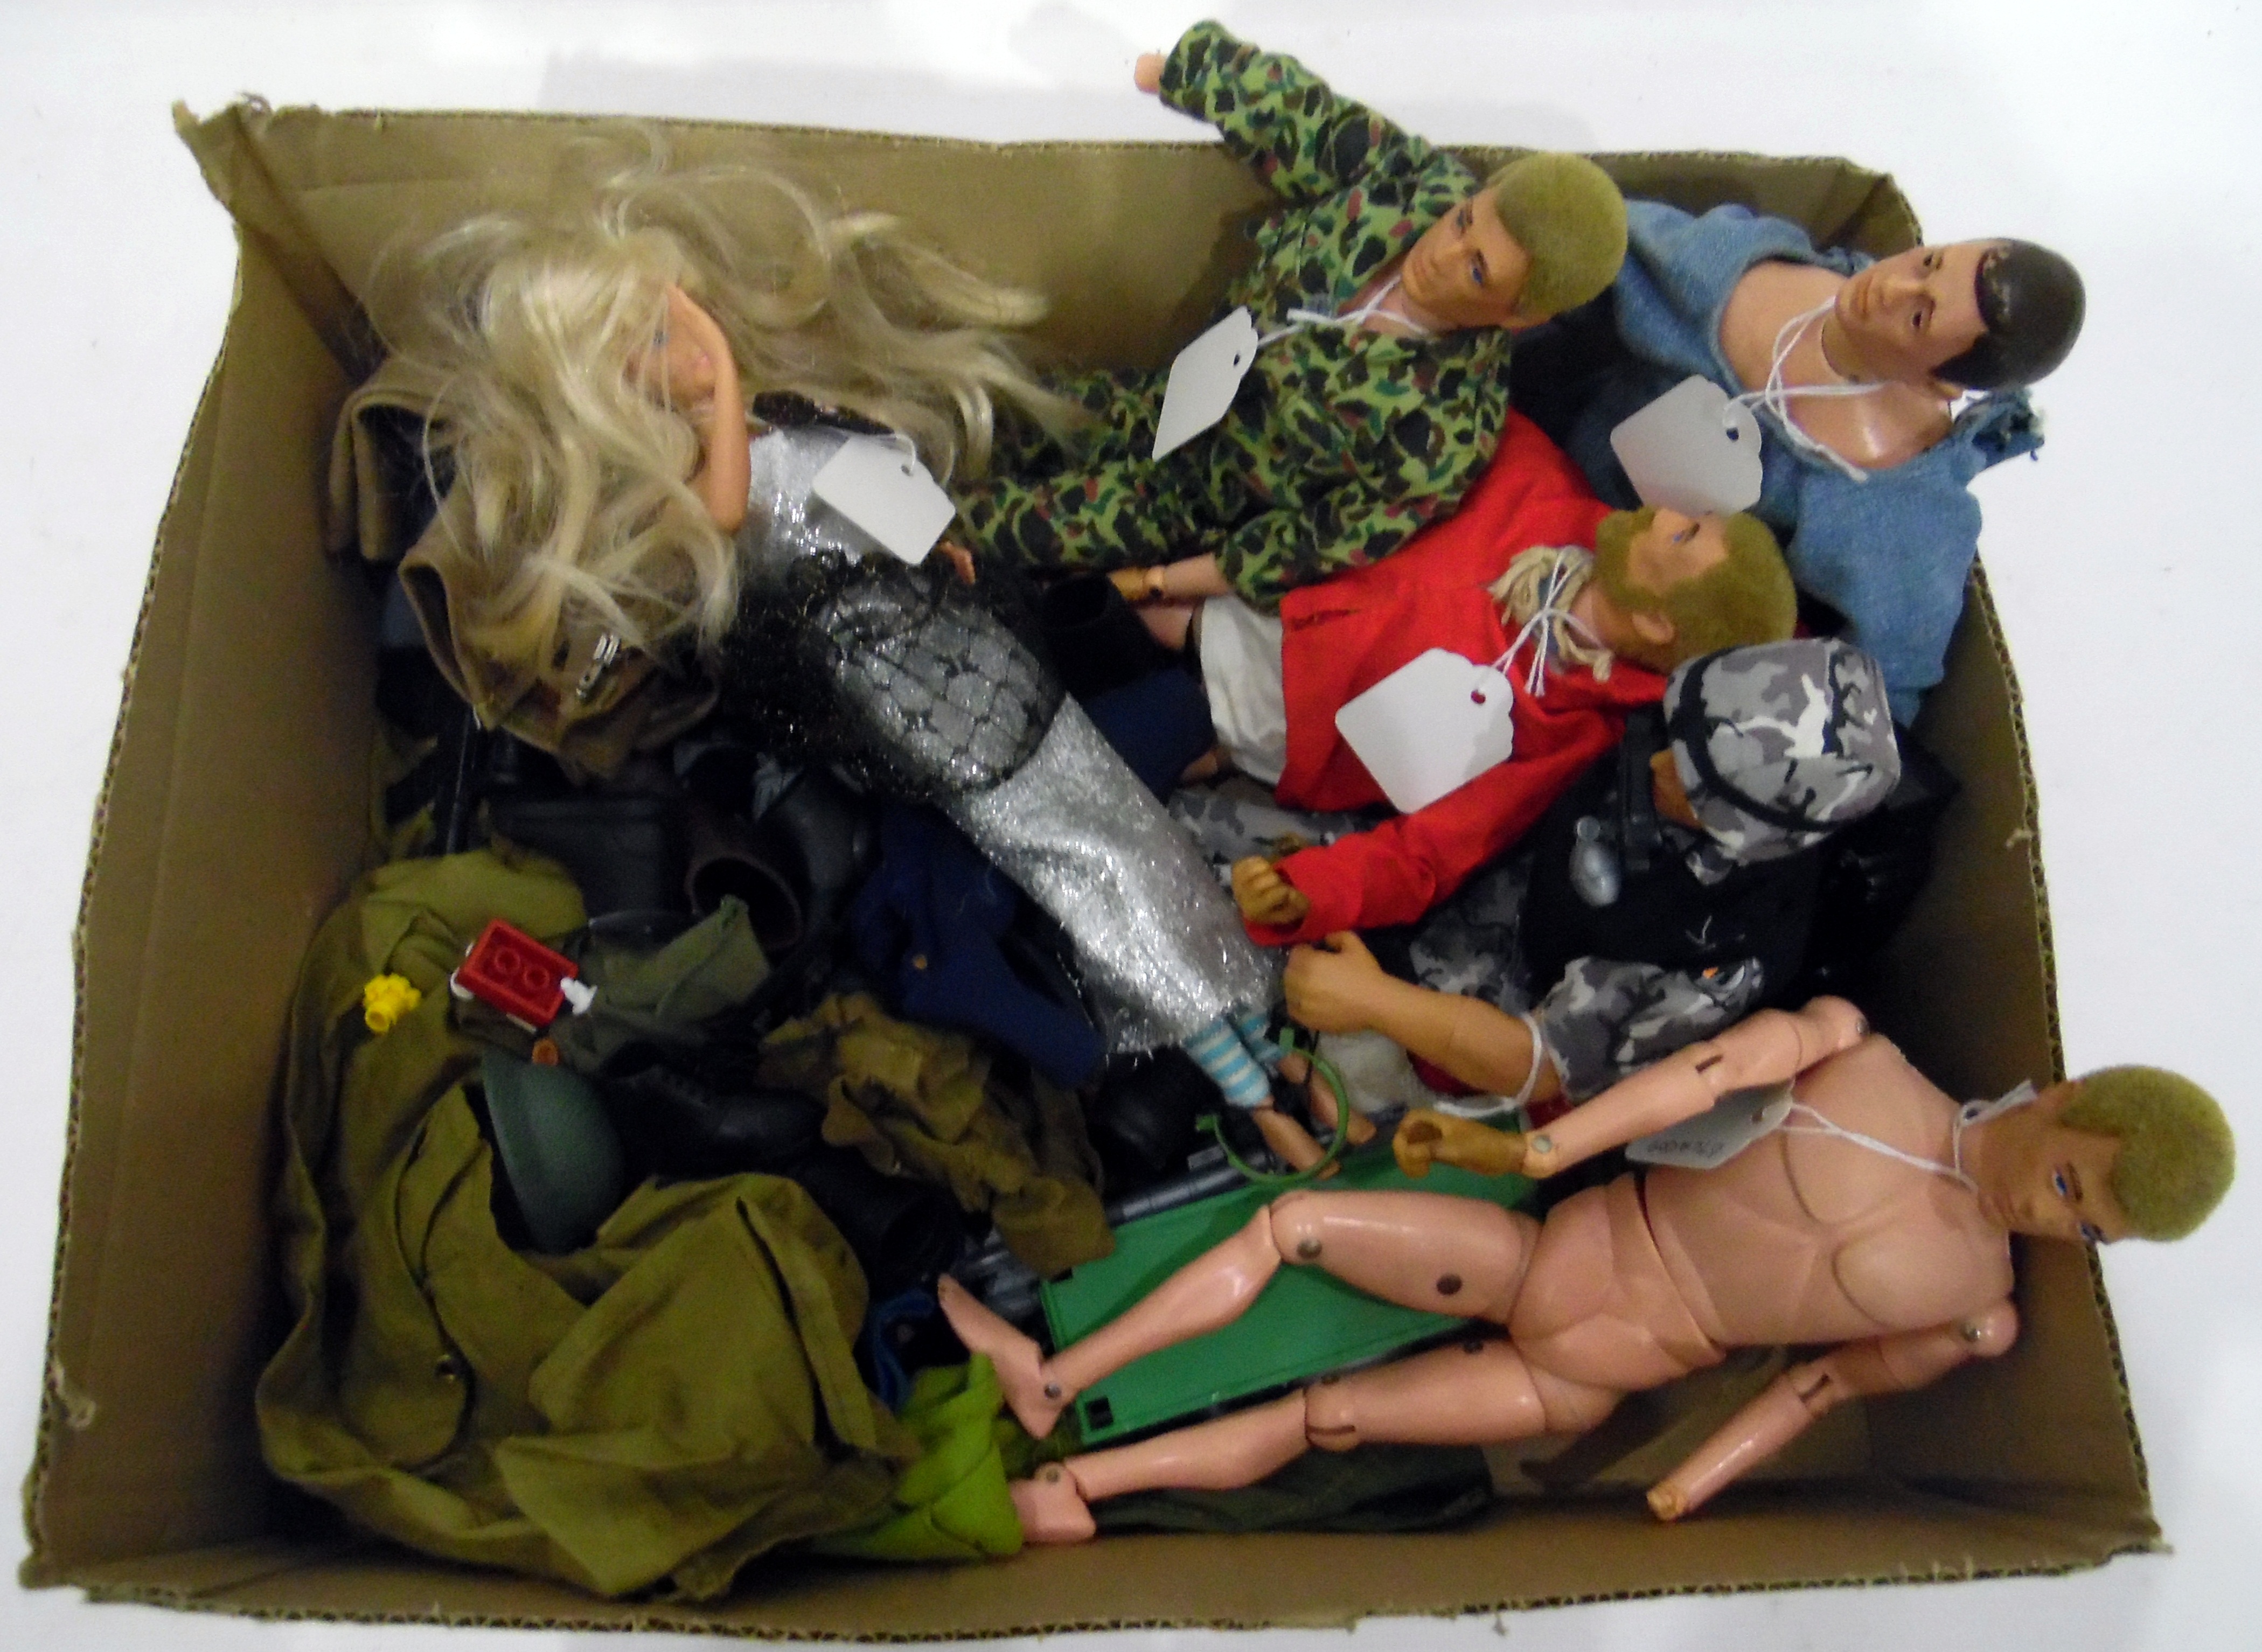 Quantity of Action Man and Barbie Dolls (1 box) - Image 2 of 2